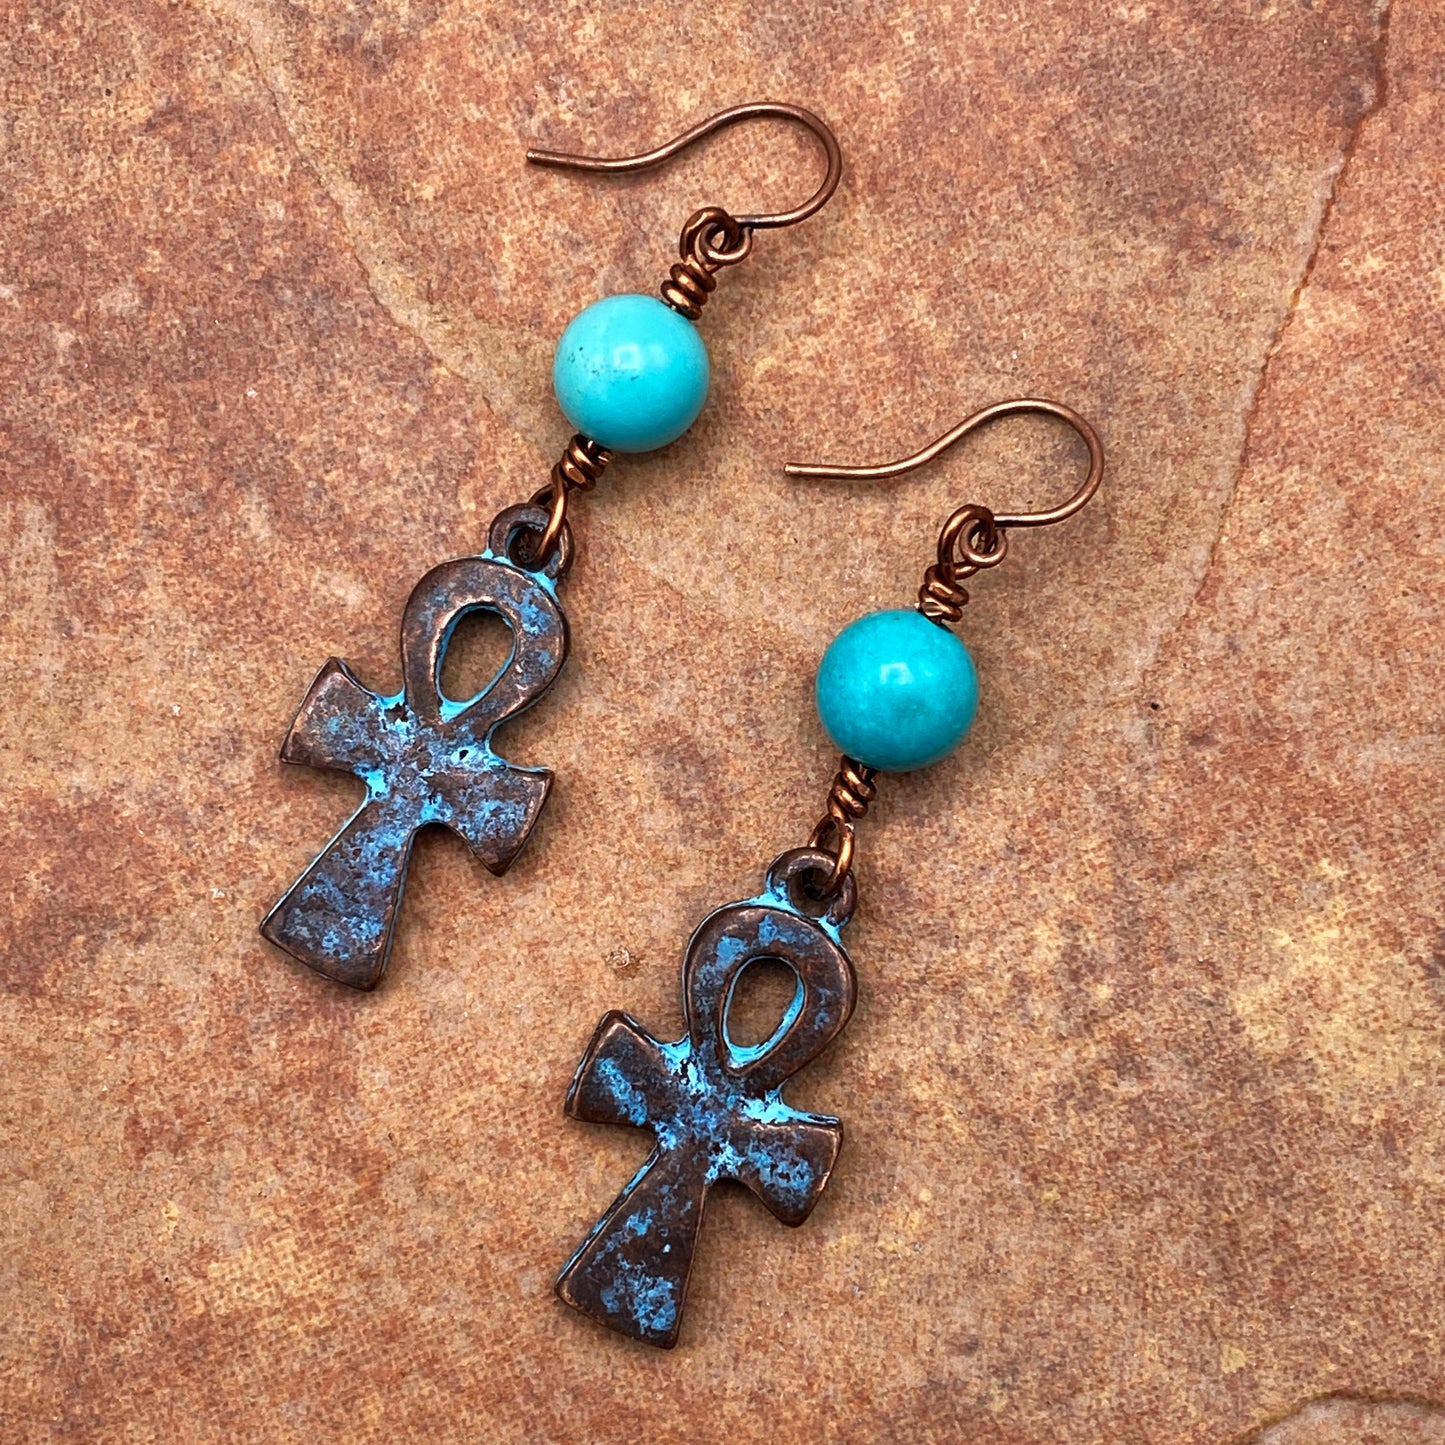 Turquoise and Copper Ankh Dangle Earrings